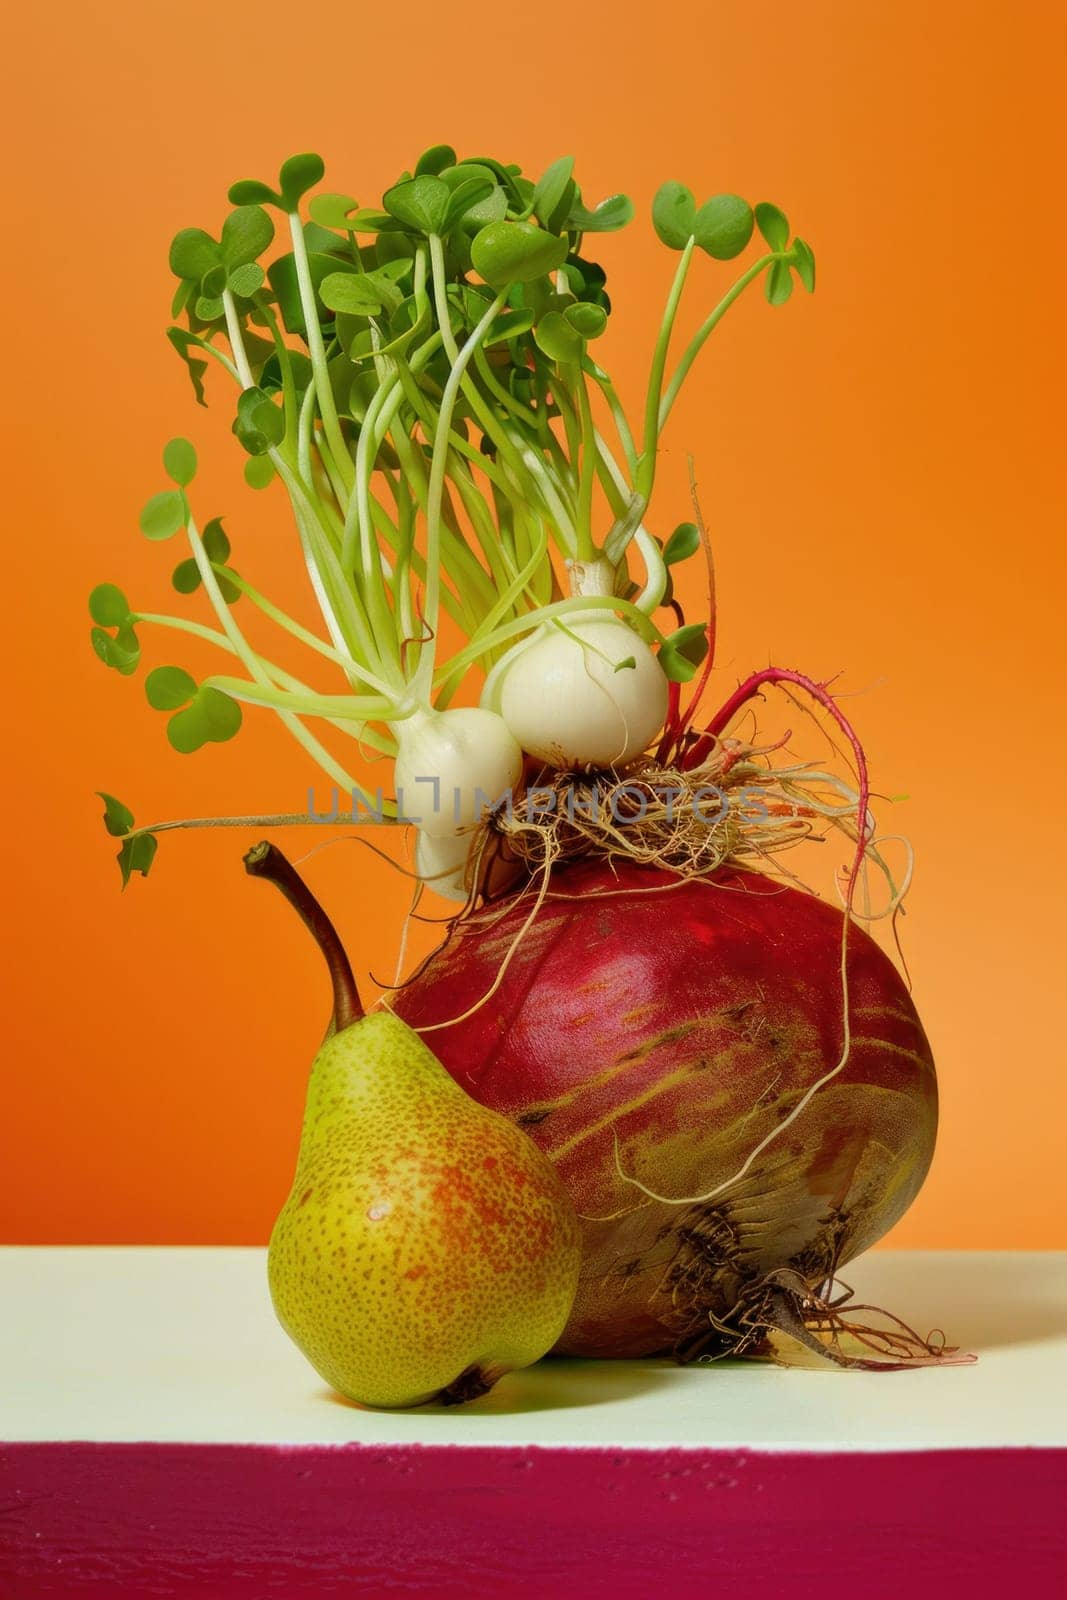 Healthy food and freshness concept pear and radish with sprouts on table